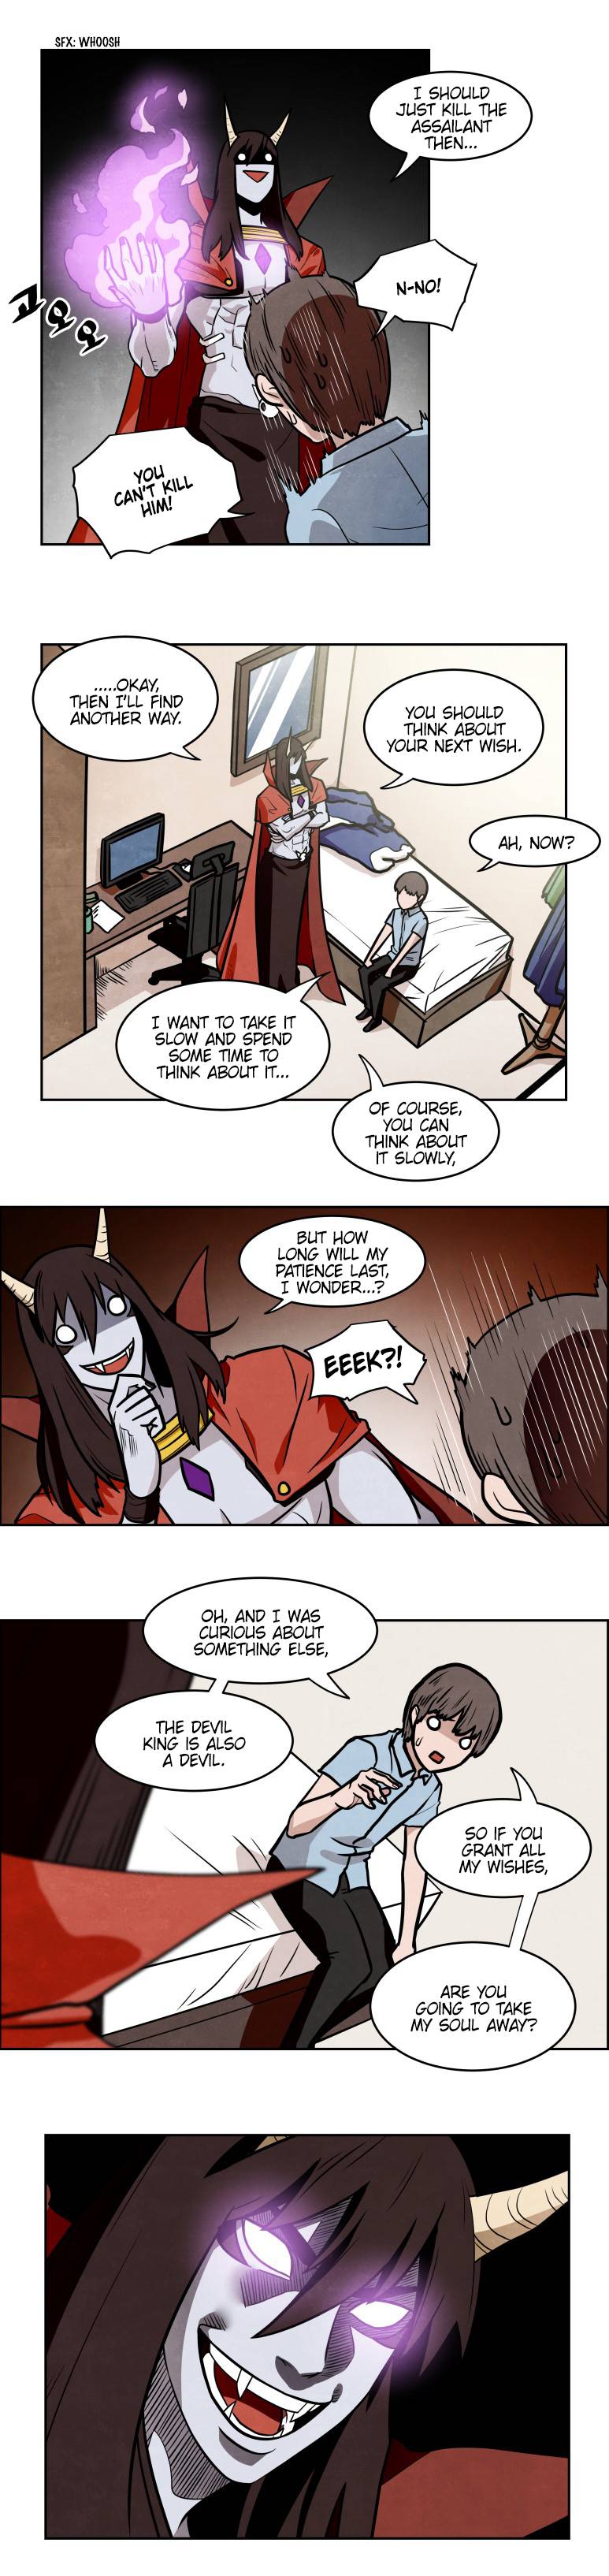 The Devil King In Another World - Page 2